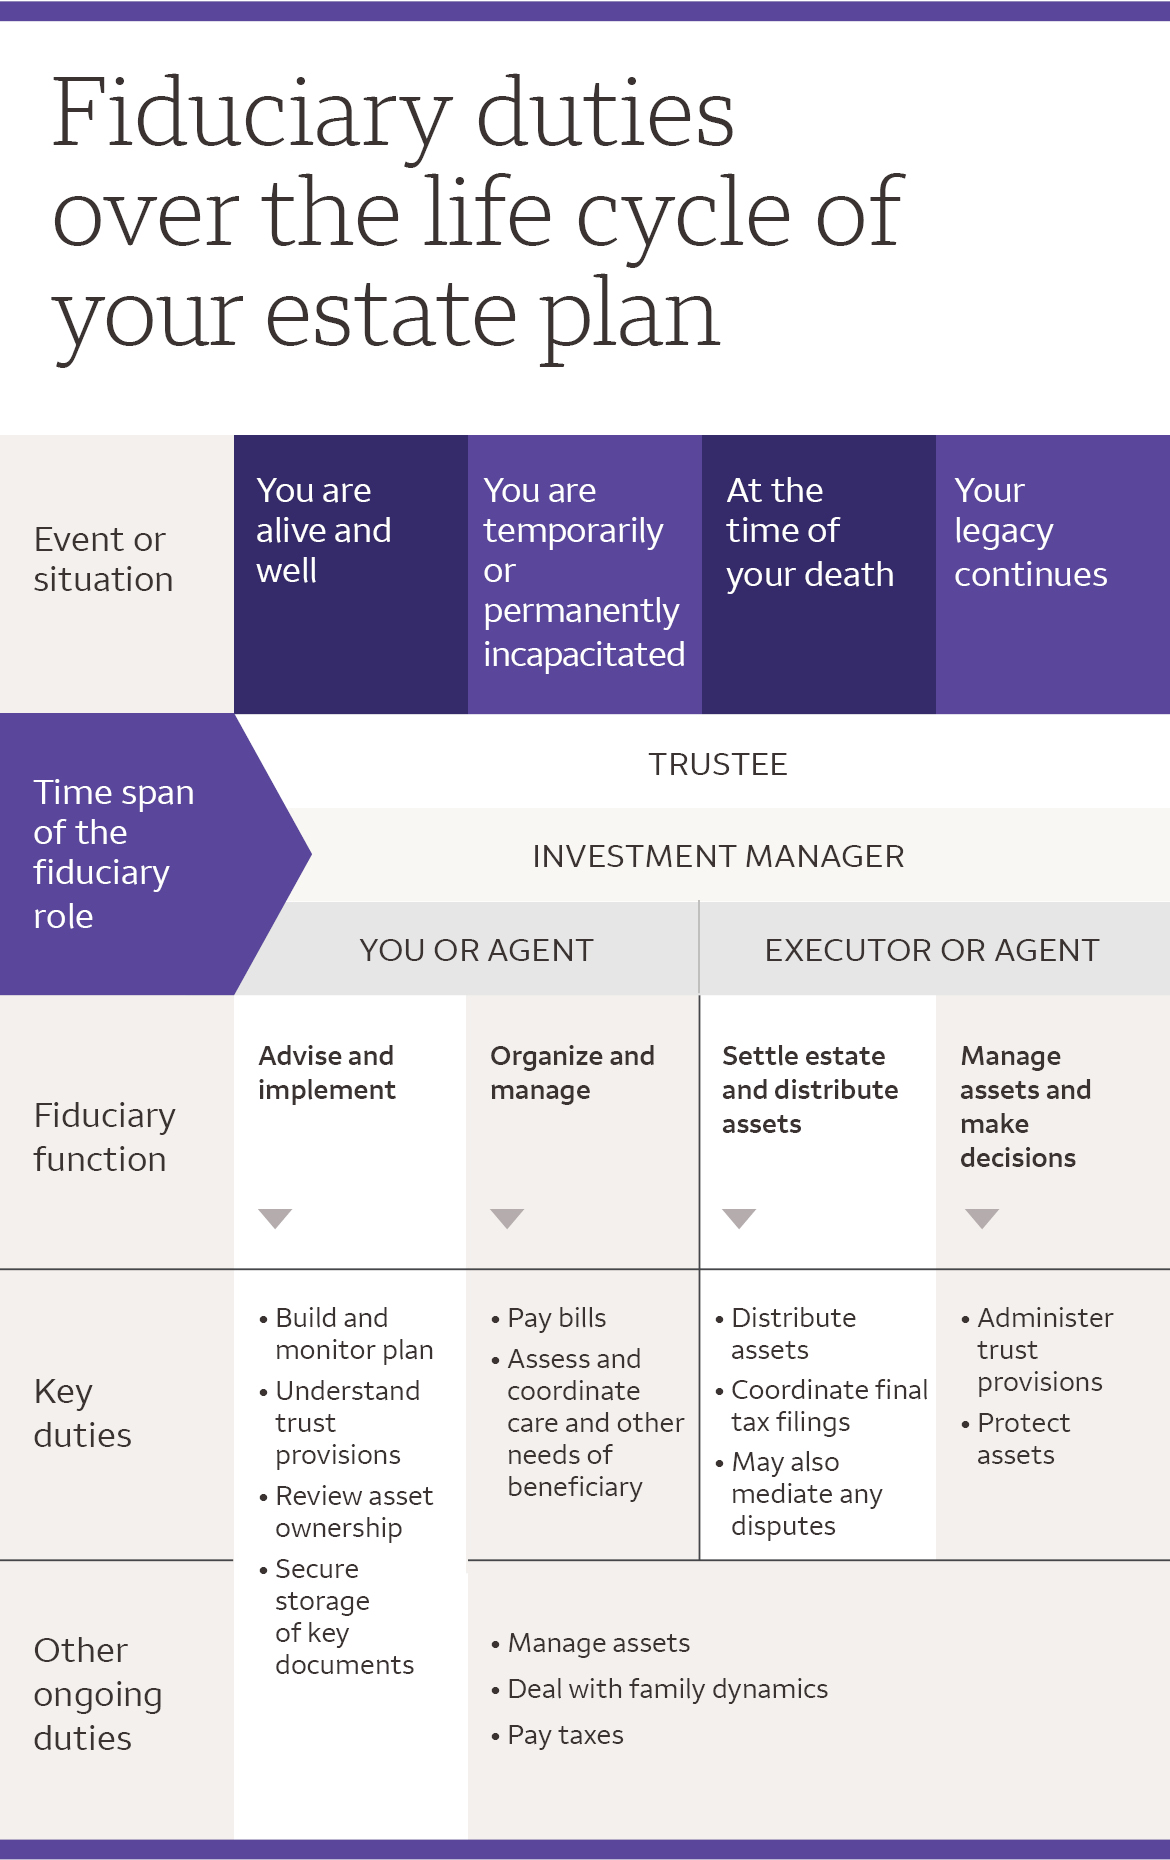 Infographic showing fiduciary duties of people over lifecycle of your estate plan. For details, click "view text alternative."